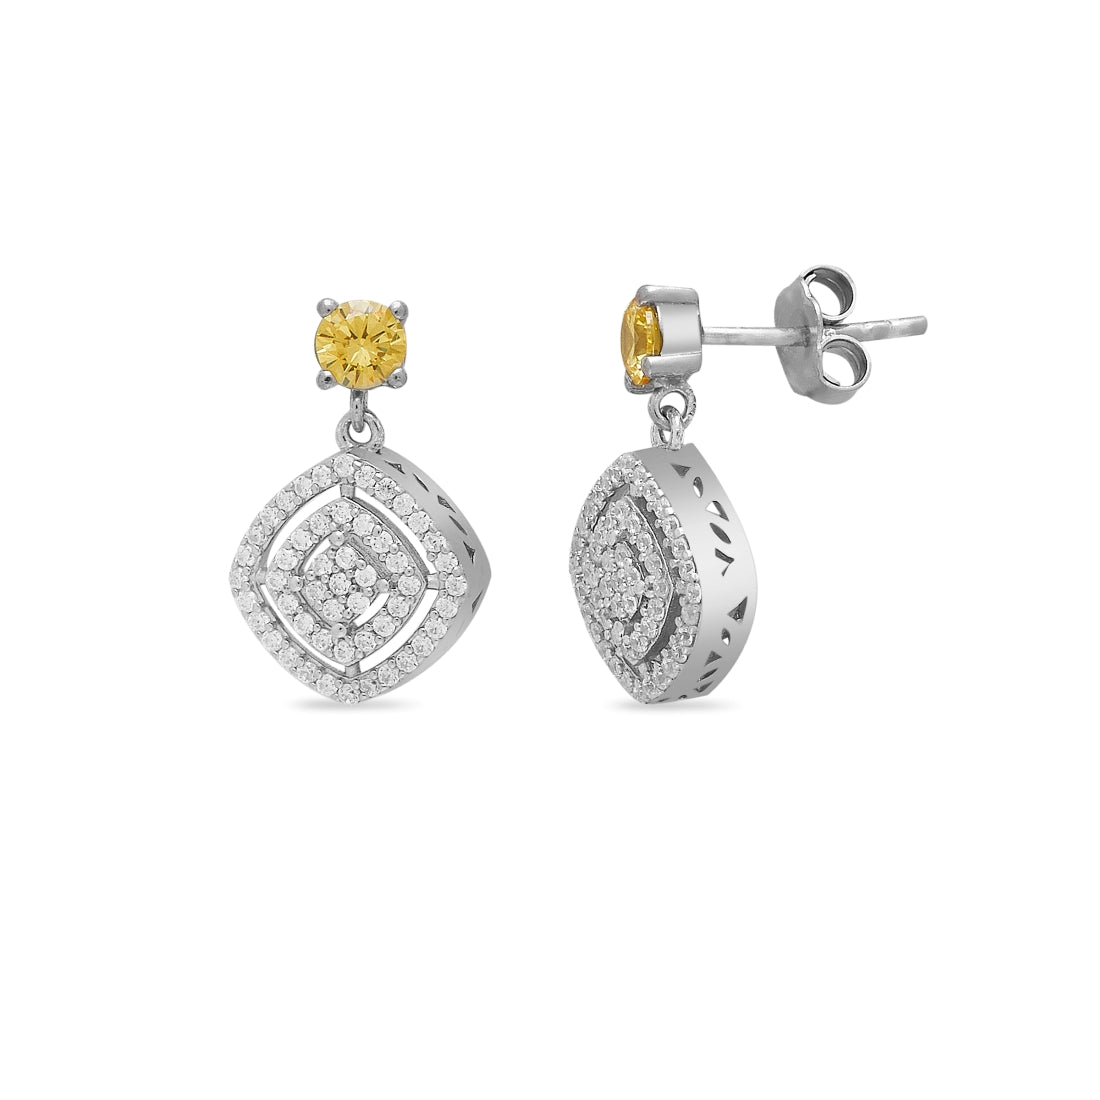 Elegant Reflections 925 Sterling Silver Rhodium-Plated Square Earrings